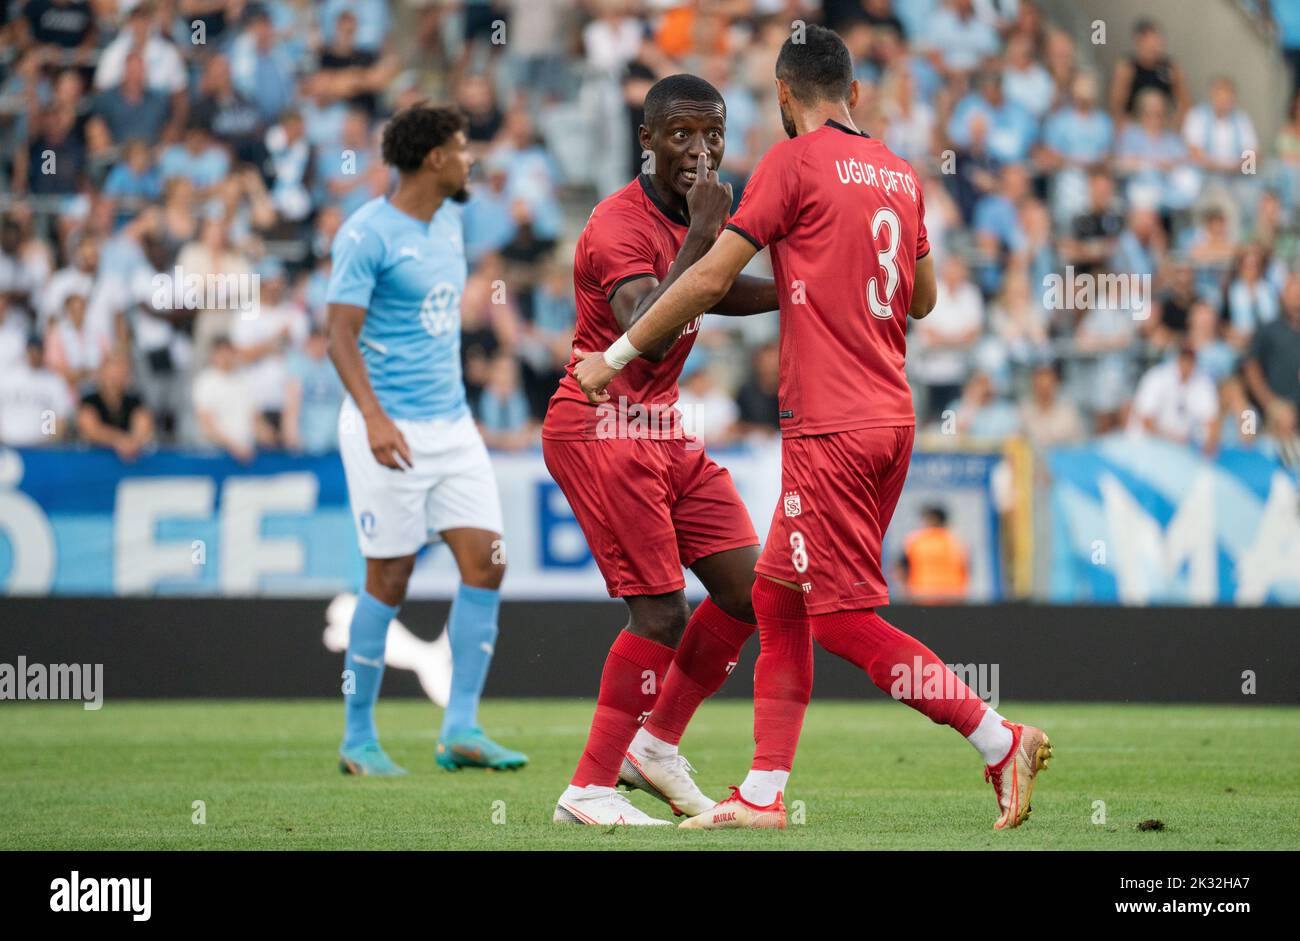 Malmoe, Sweden. 18th, August 2022. Ugur Cifti (3) and Max Gradel (7) of Sivasspor FF seen during the UEFA Europa League qualification match between Malmö FF and Sivasspor at Eleda Stadion in Malmö. (Photo credit: Gonzales Photo - Joe Miller). Stock Photo